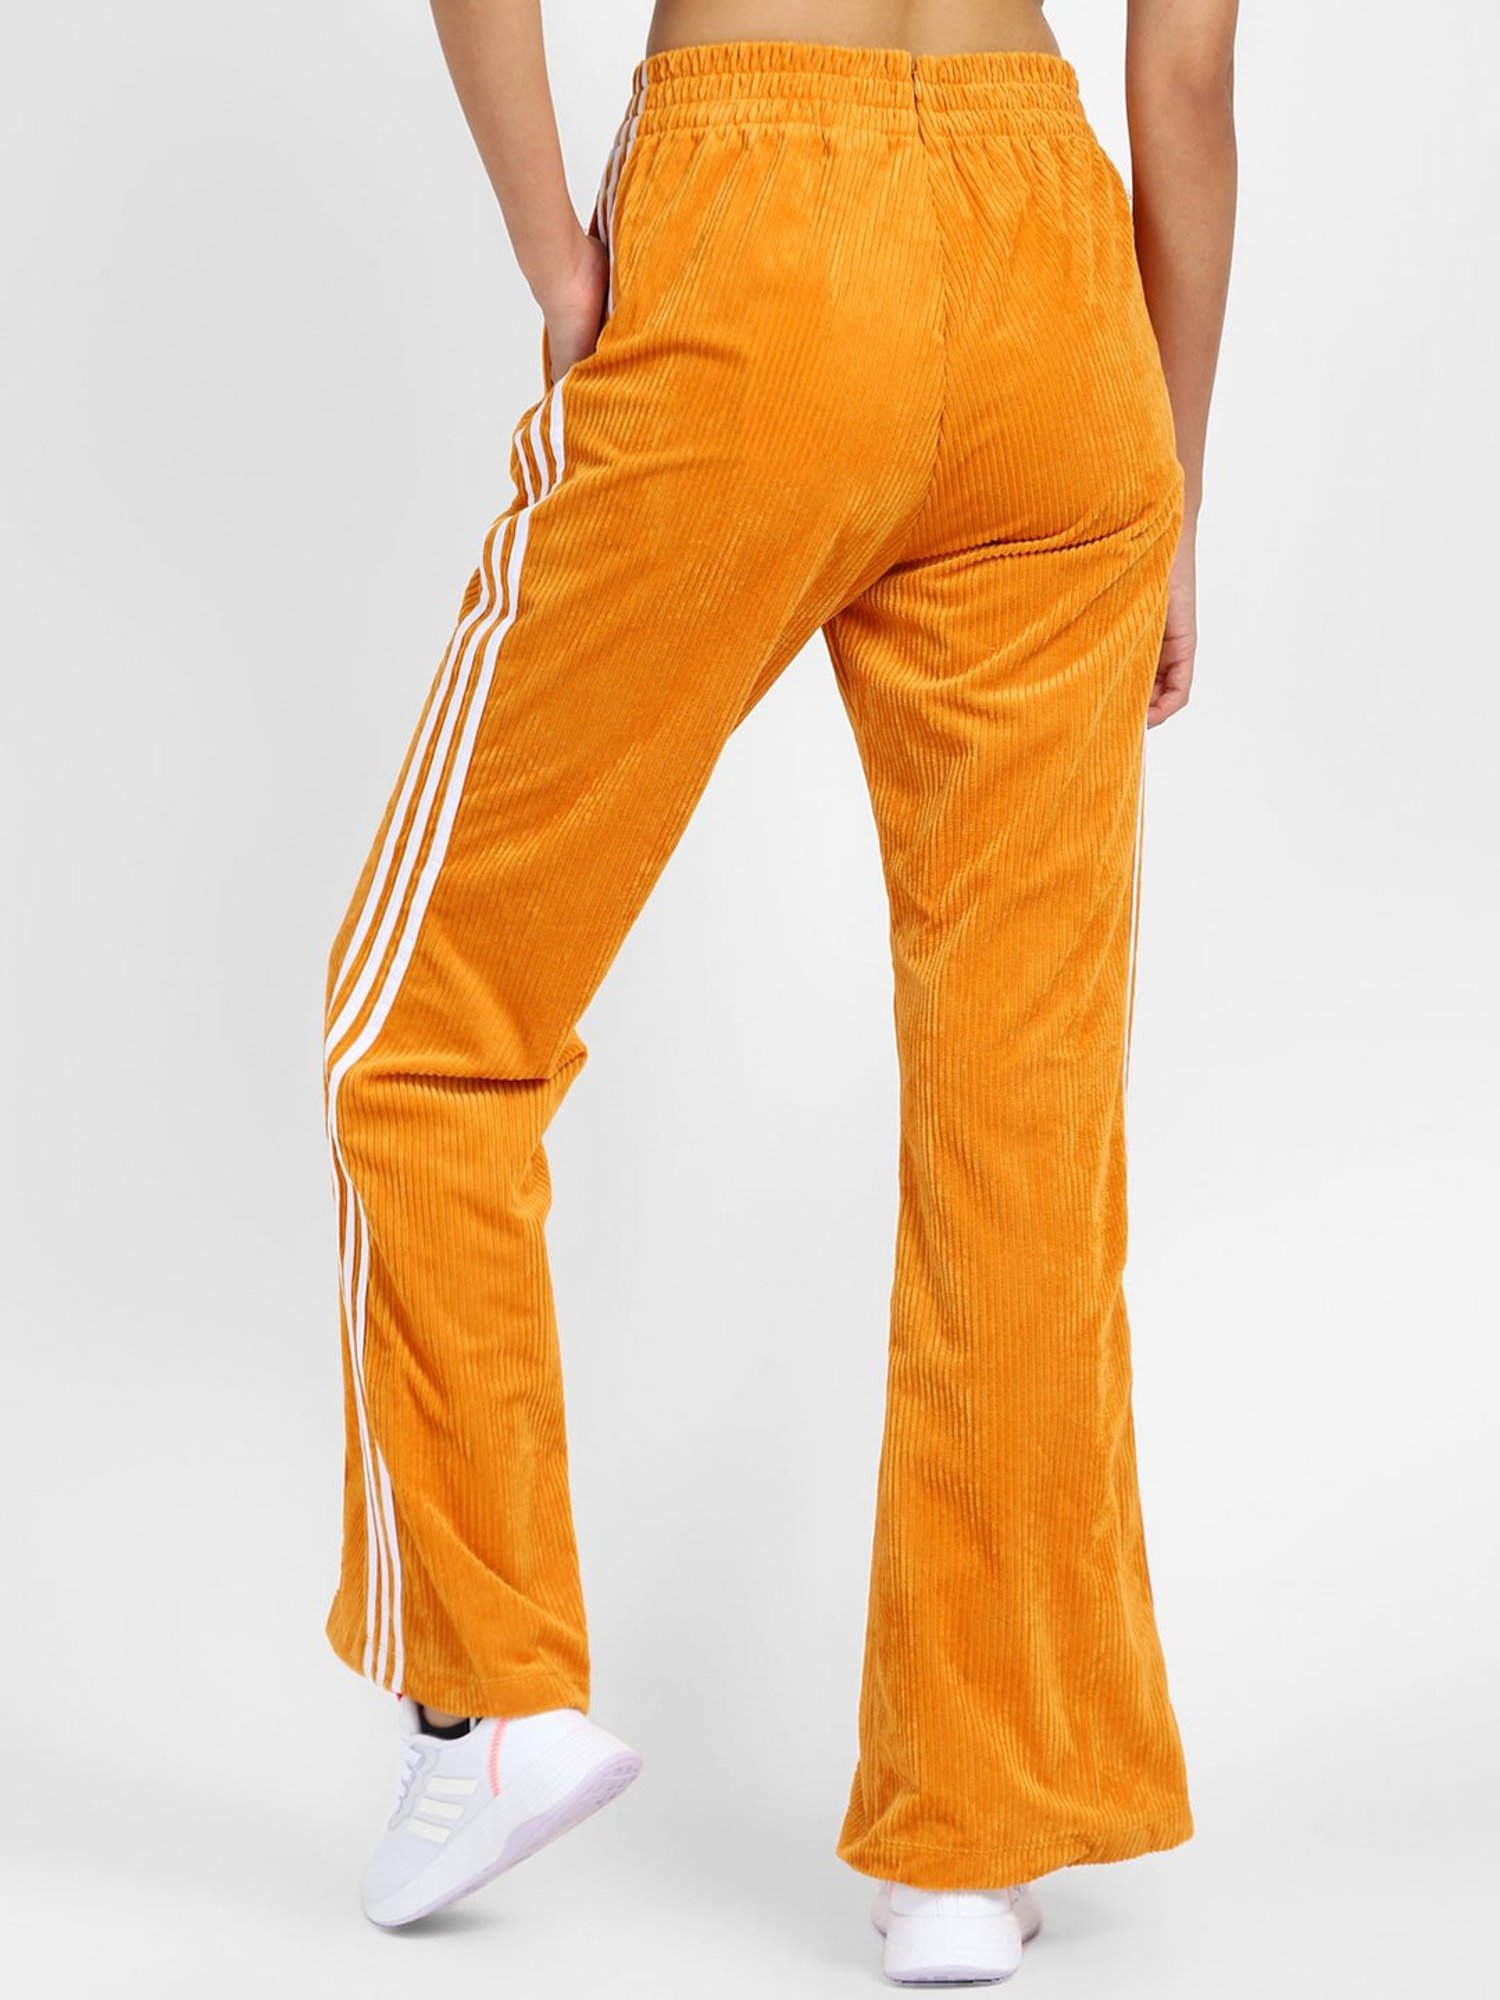 Buy Orange Trousers & Pants for Women by The Silhouette Store Online |  Ajio.com